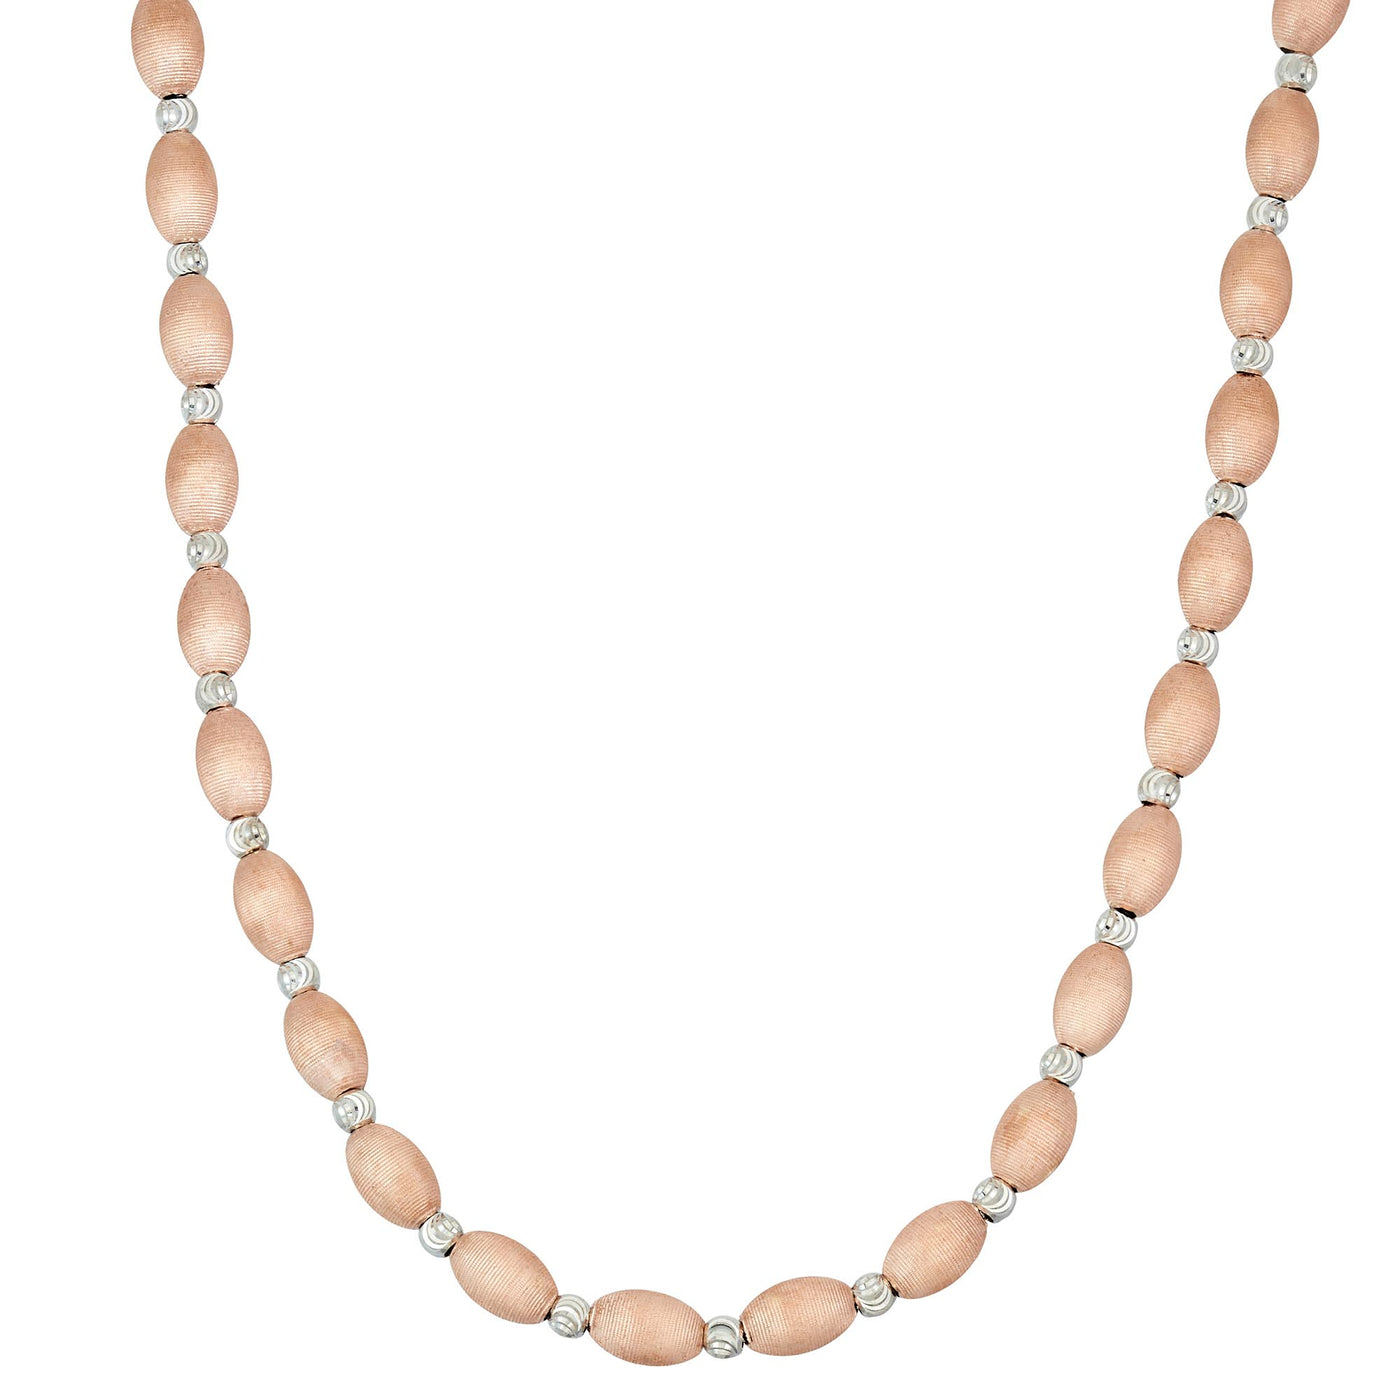 Rebecca Sloane Rose Gold and Rhodium Plated Silver Bead Necklace